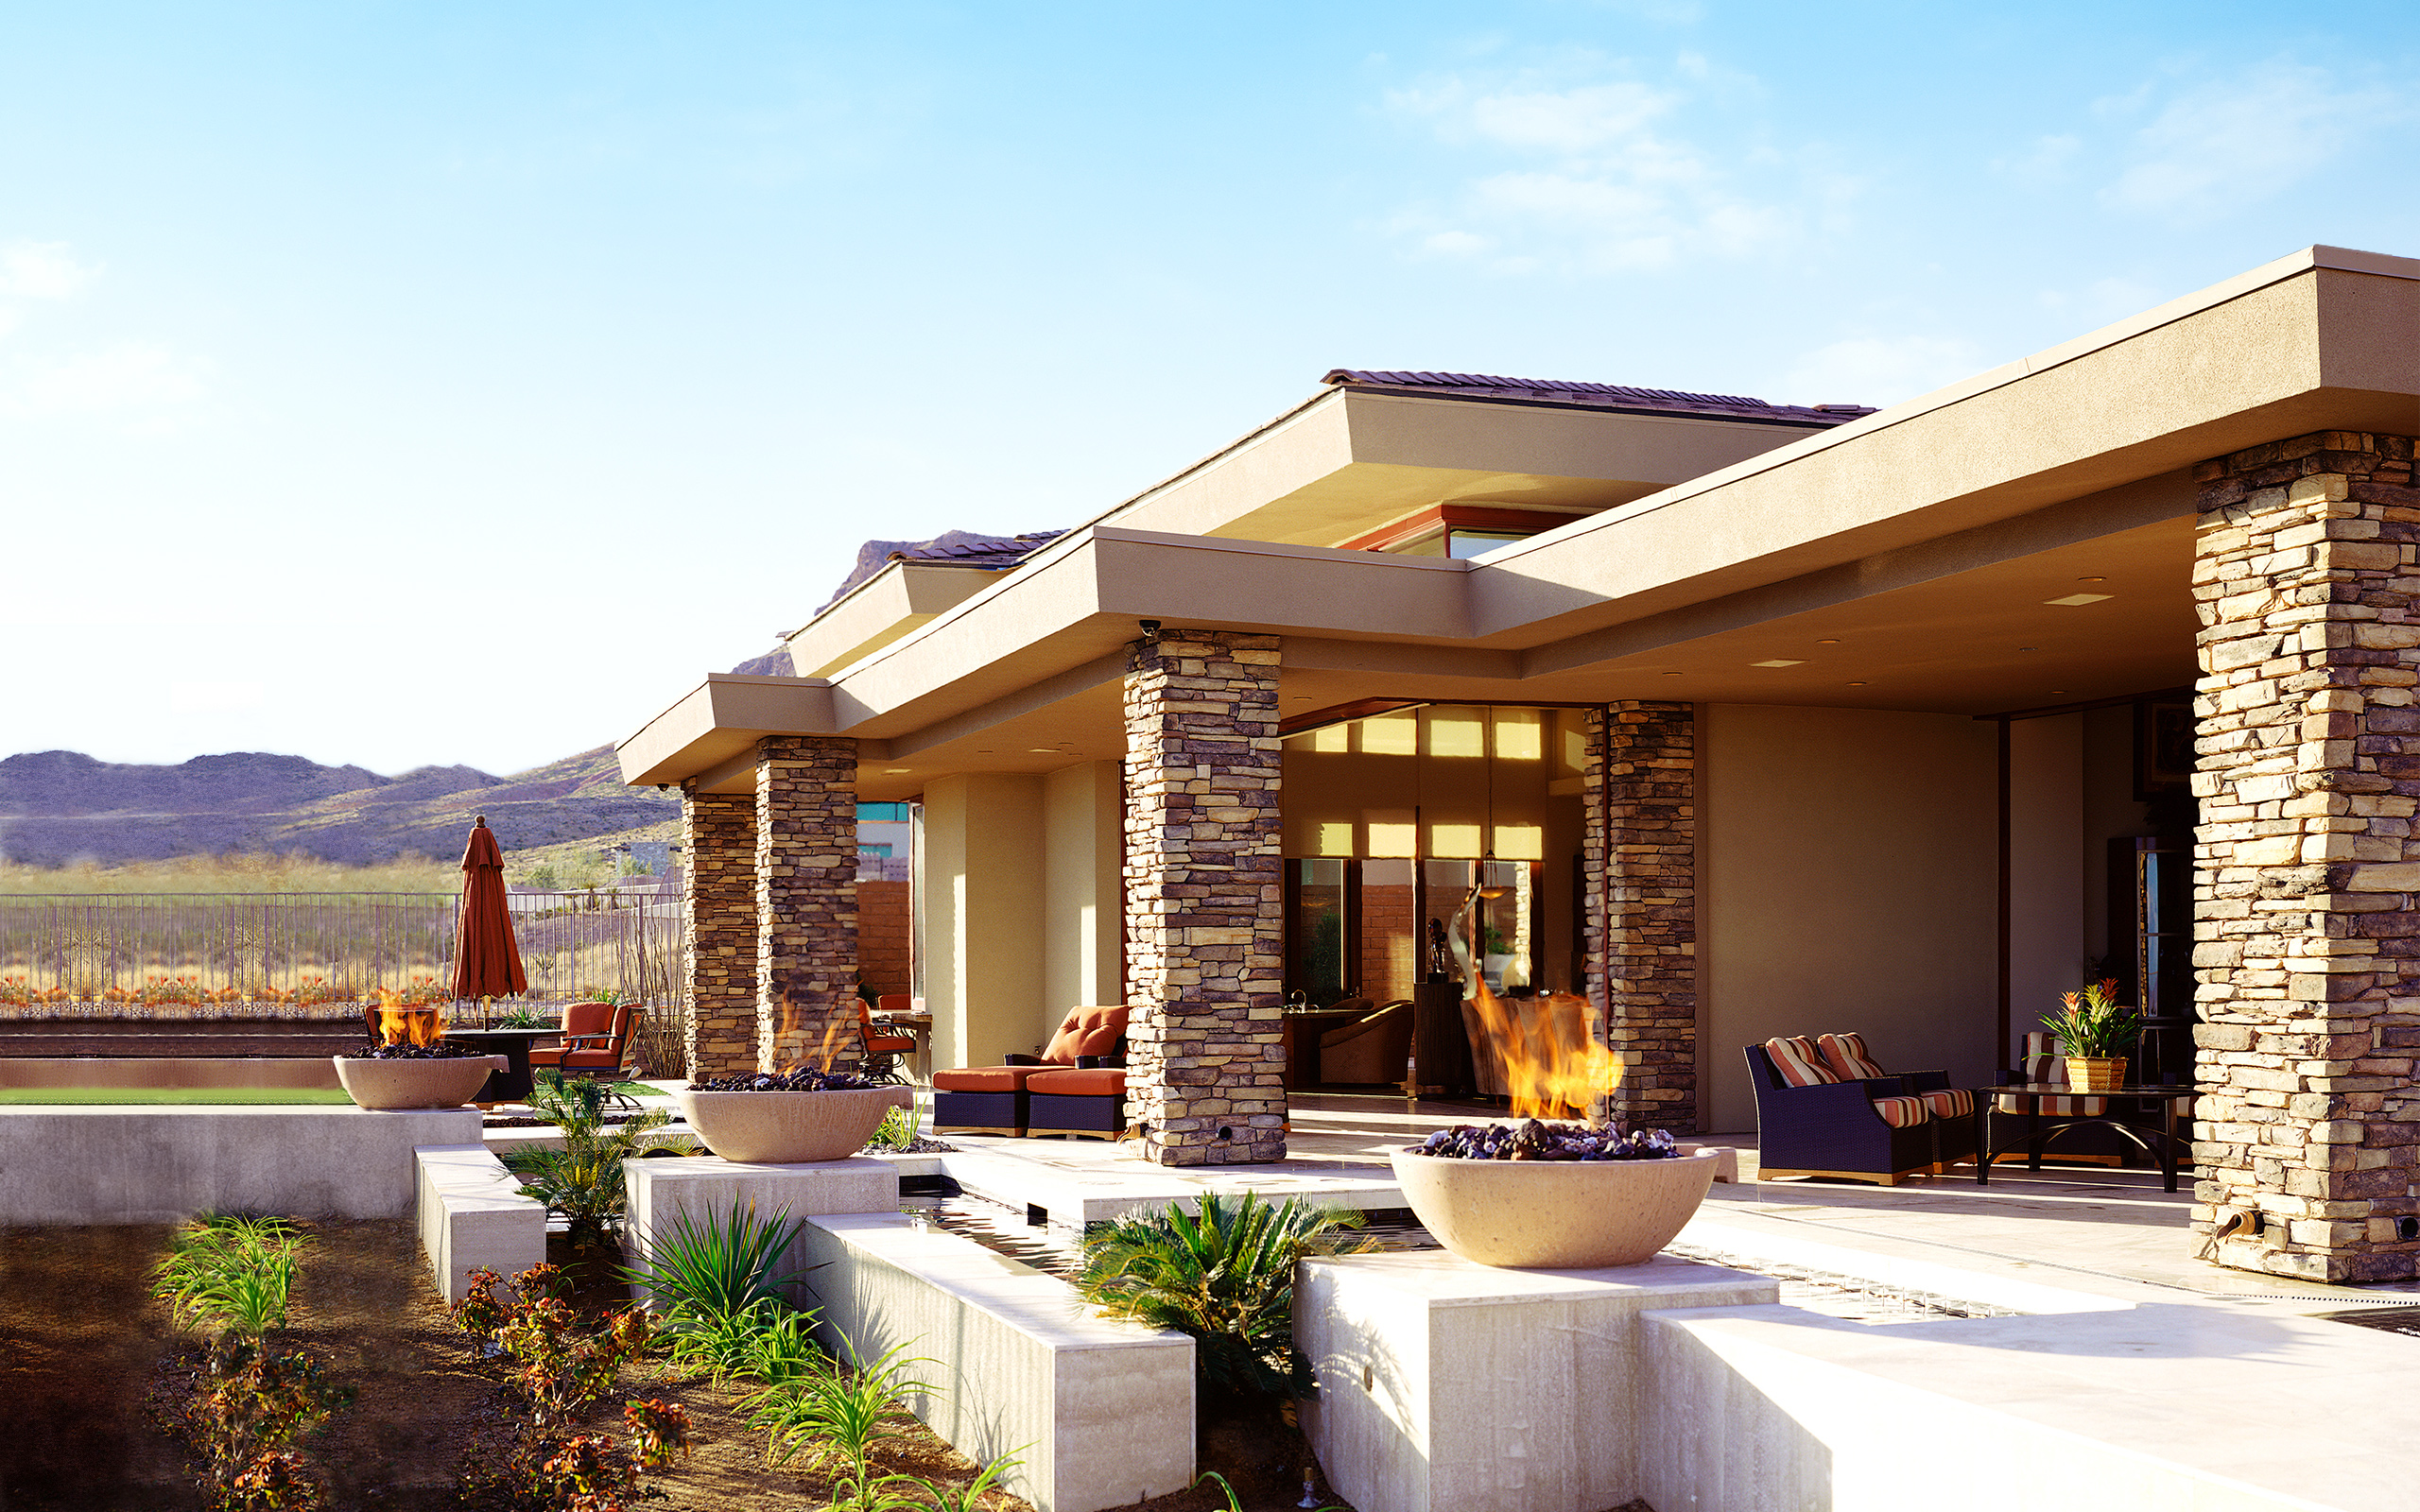 Outside view of a Modern house with a fire pits and a view of mountains